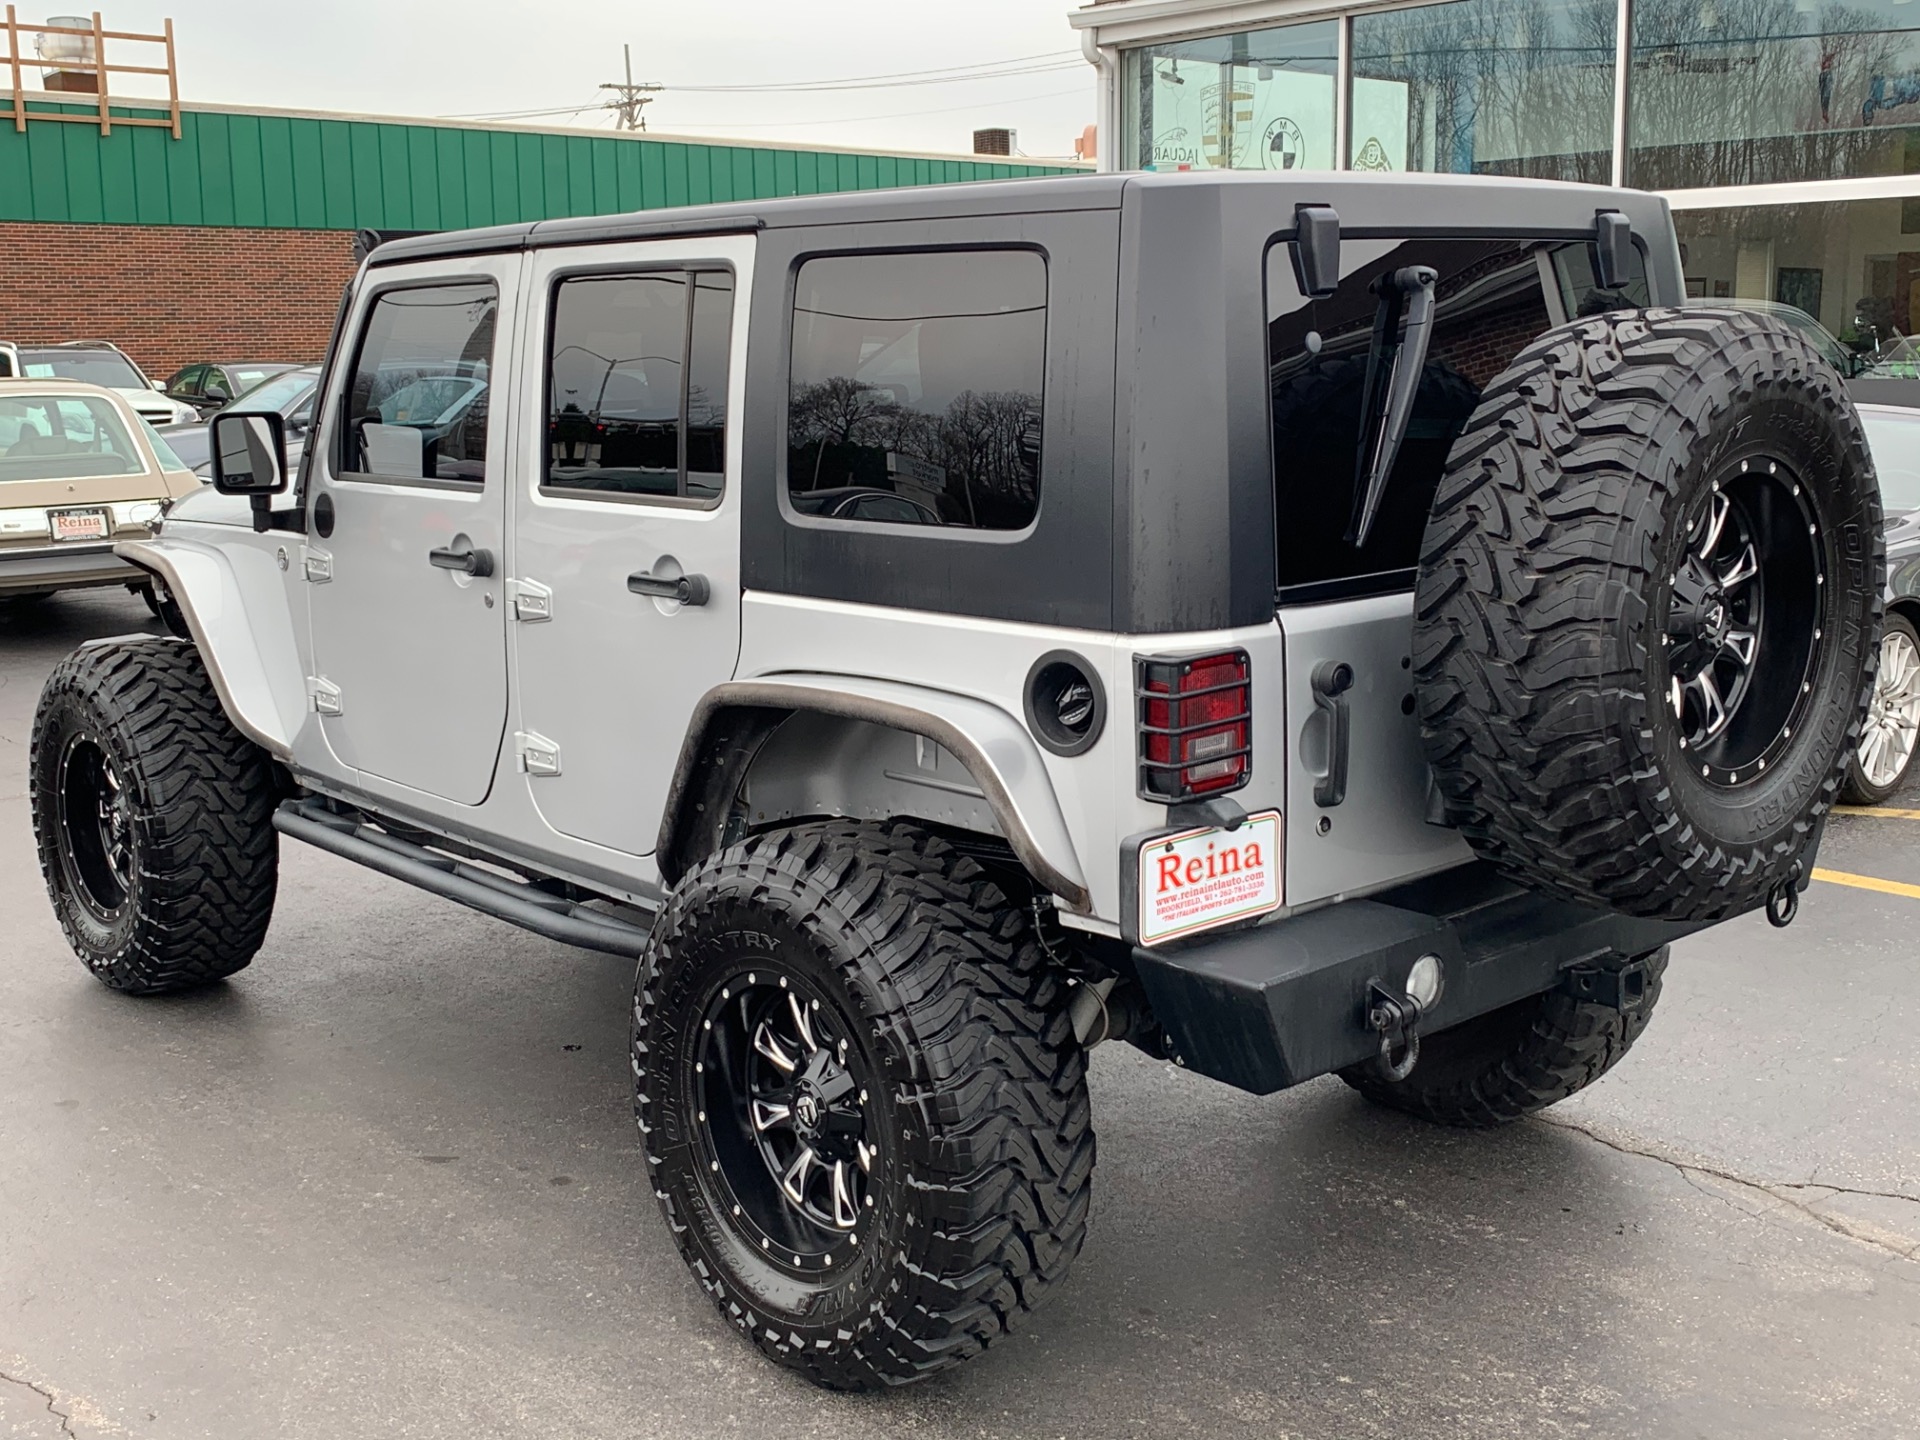 2007 Jeep Wrangler Unlimited Sahara 4x4 Rubicon Express Lift Stock # 0367  for sale near Brookfield, WI | WI Jeep Dealer